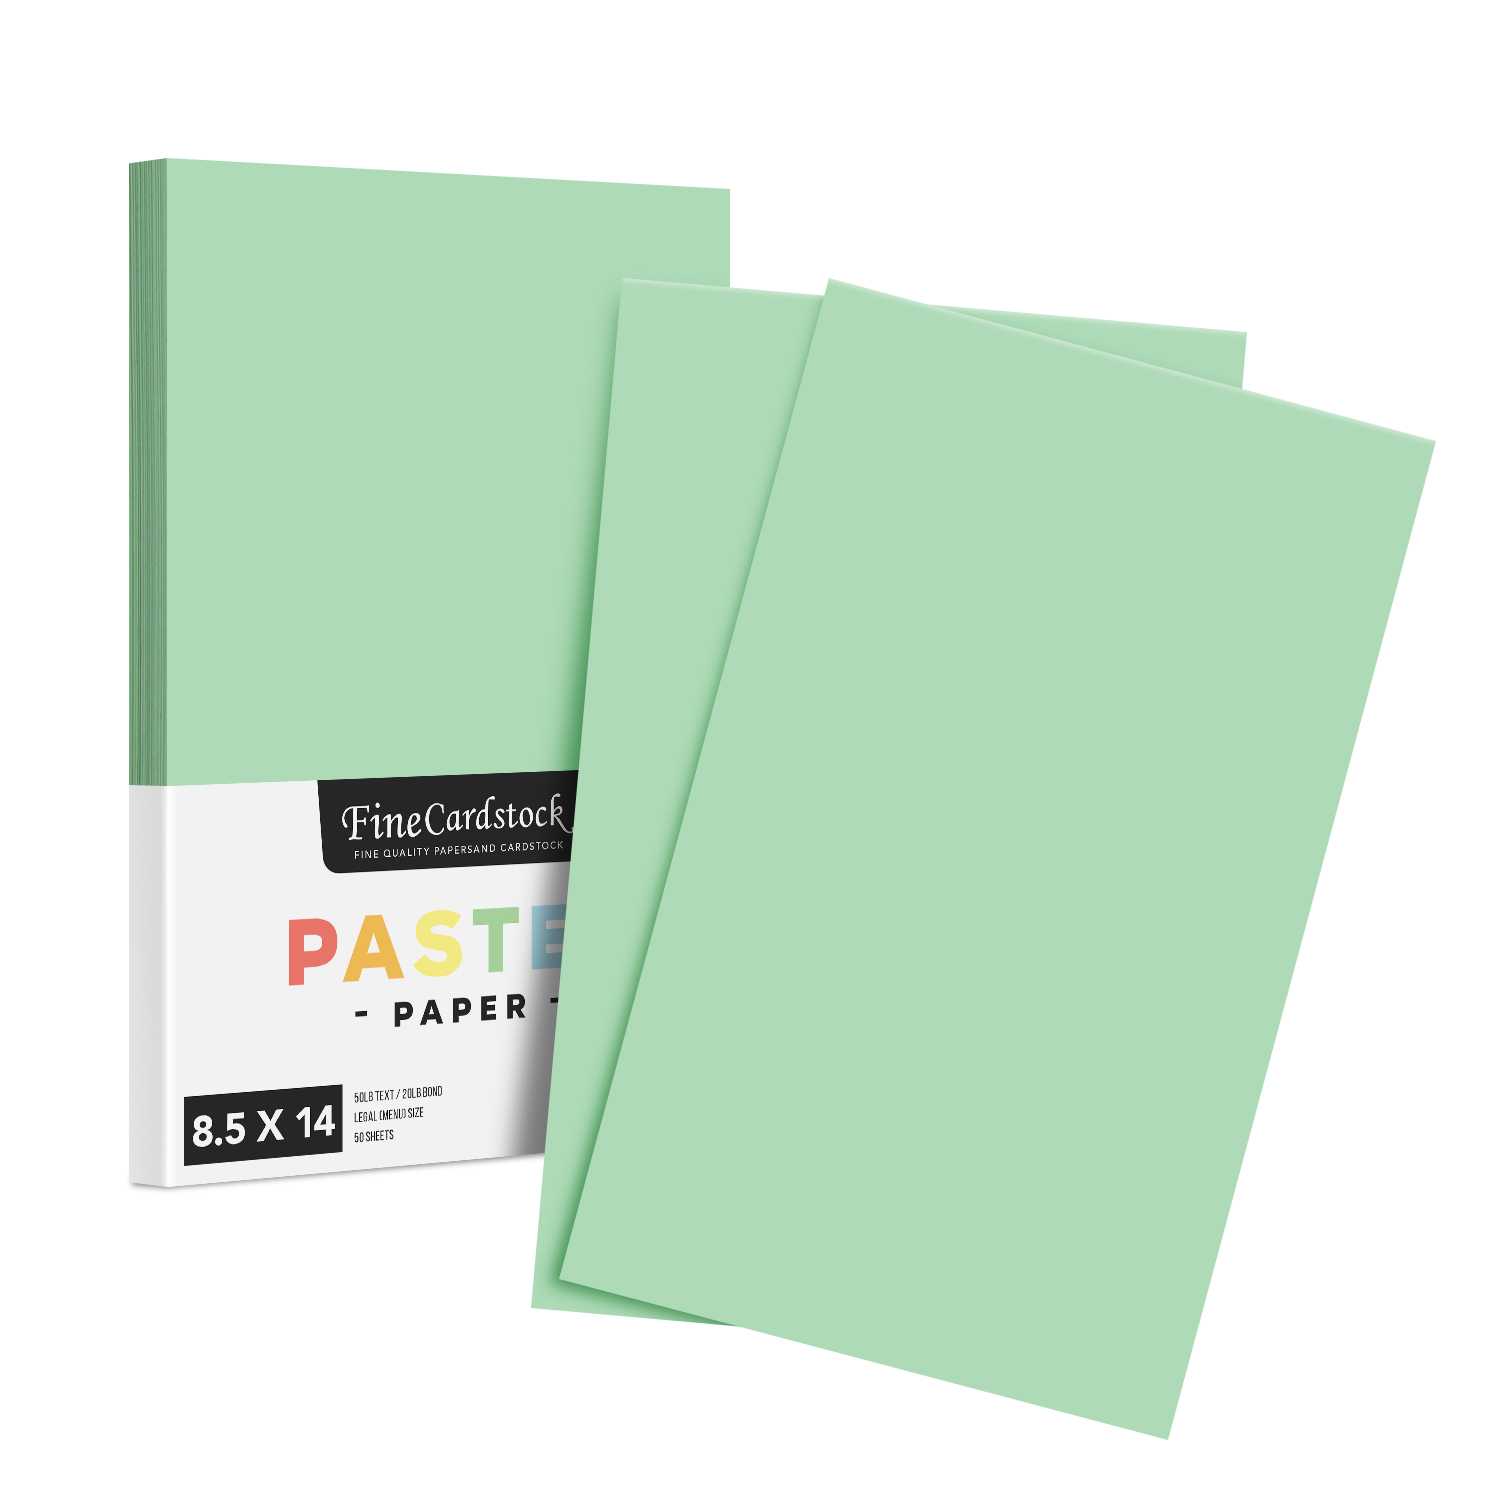 Quality SQUARE CARDSTOCK PAPER - Choose Color, How Many, Size